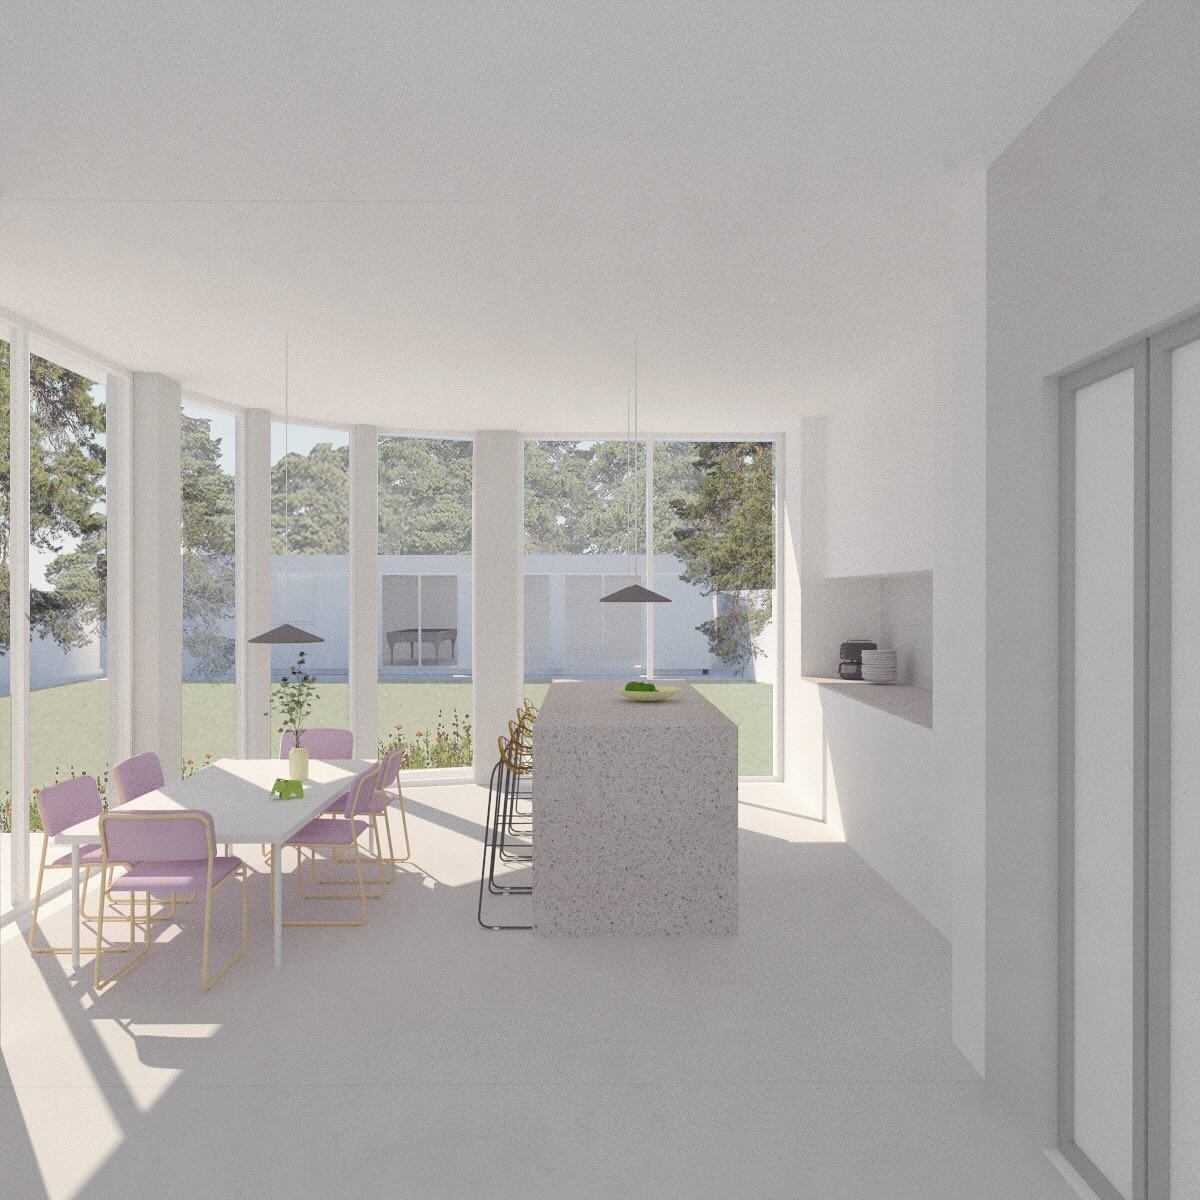 P L A N N I N G  A P P R O V E D

Planning permission has been approved for a curved #contemporary extension to an Edwardian house in a conservation area four our #eastmolesey #clients 

Let&rsquo;s get building!

#architecture #architecturedesign #s